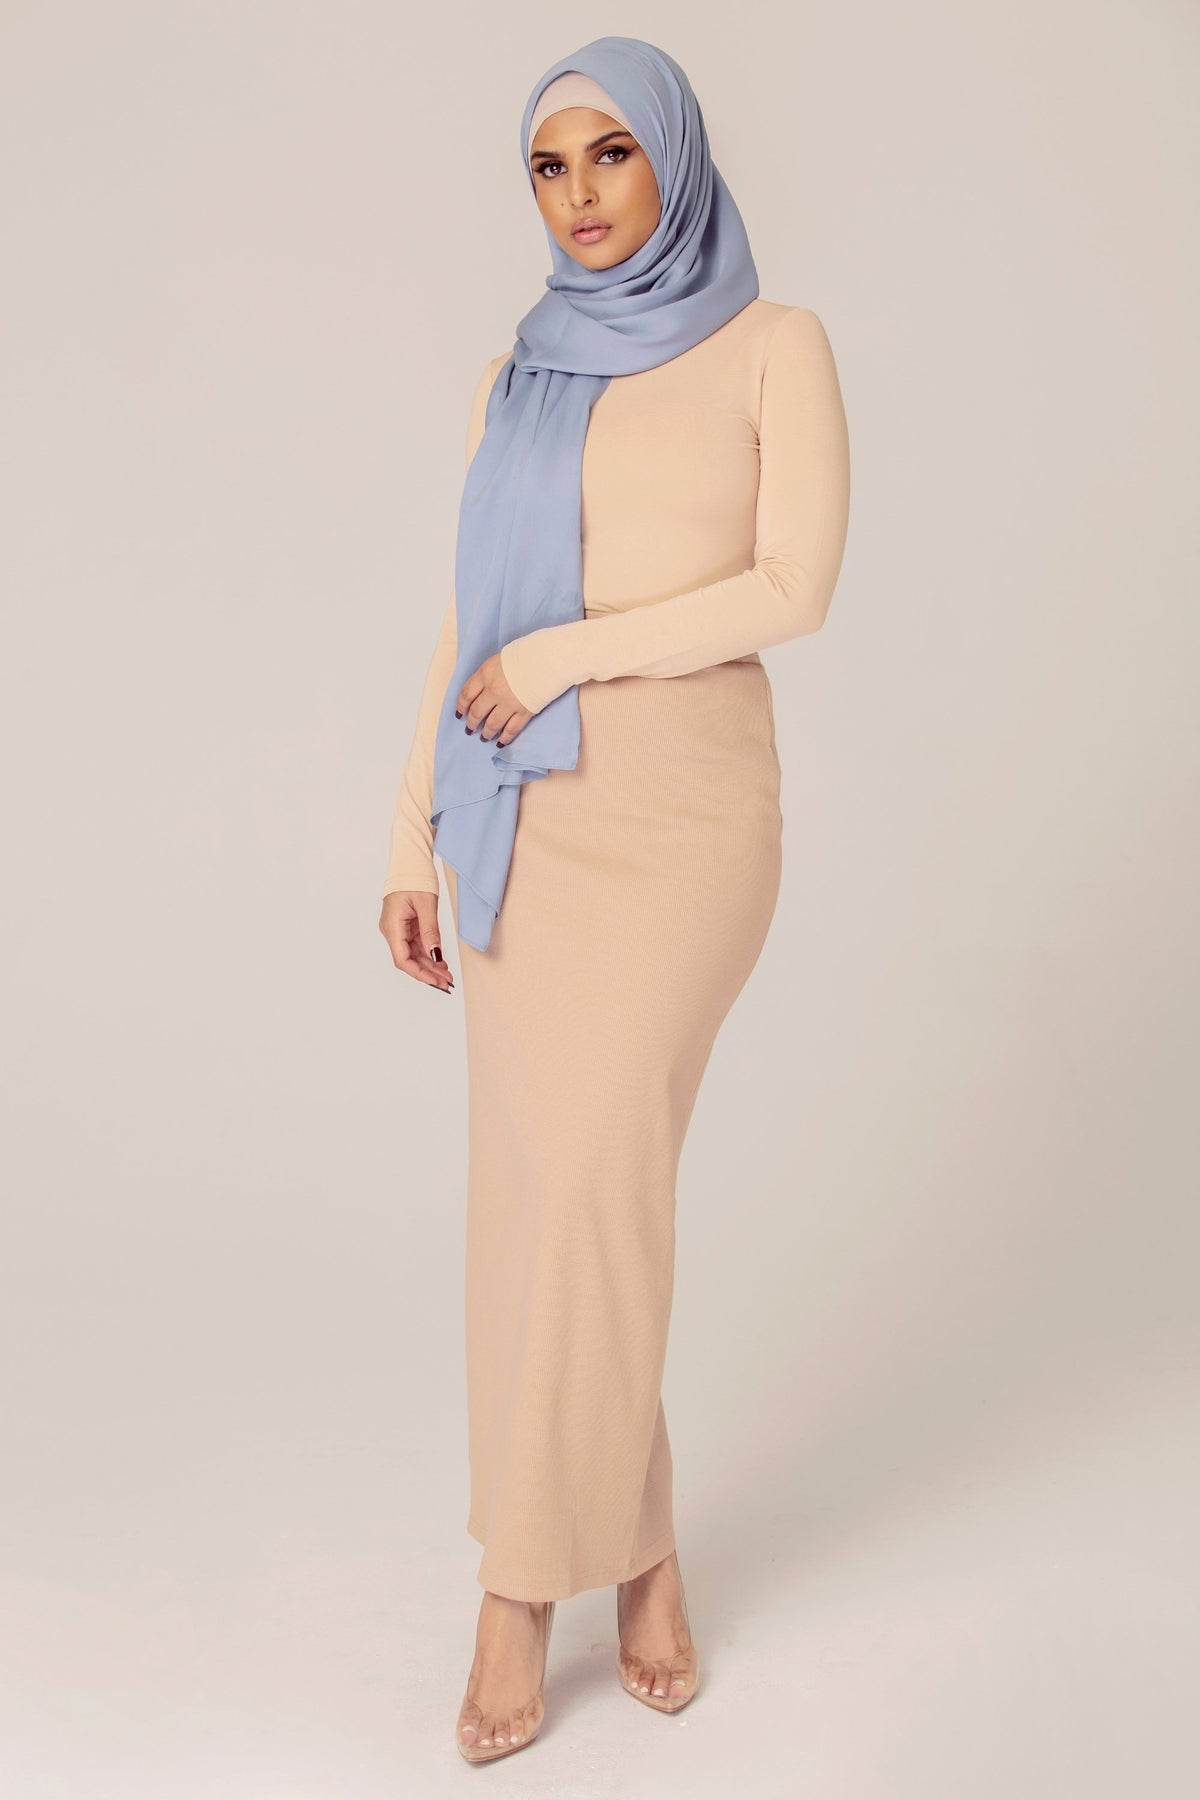 Ribbed Maxi Skirt - Camel Nude Veiled Collection 